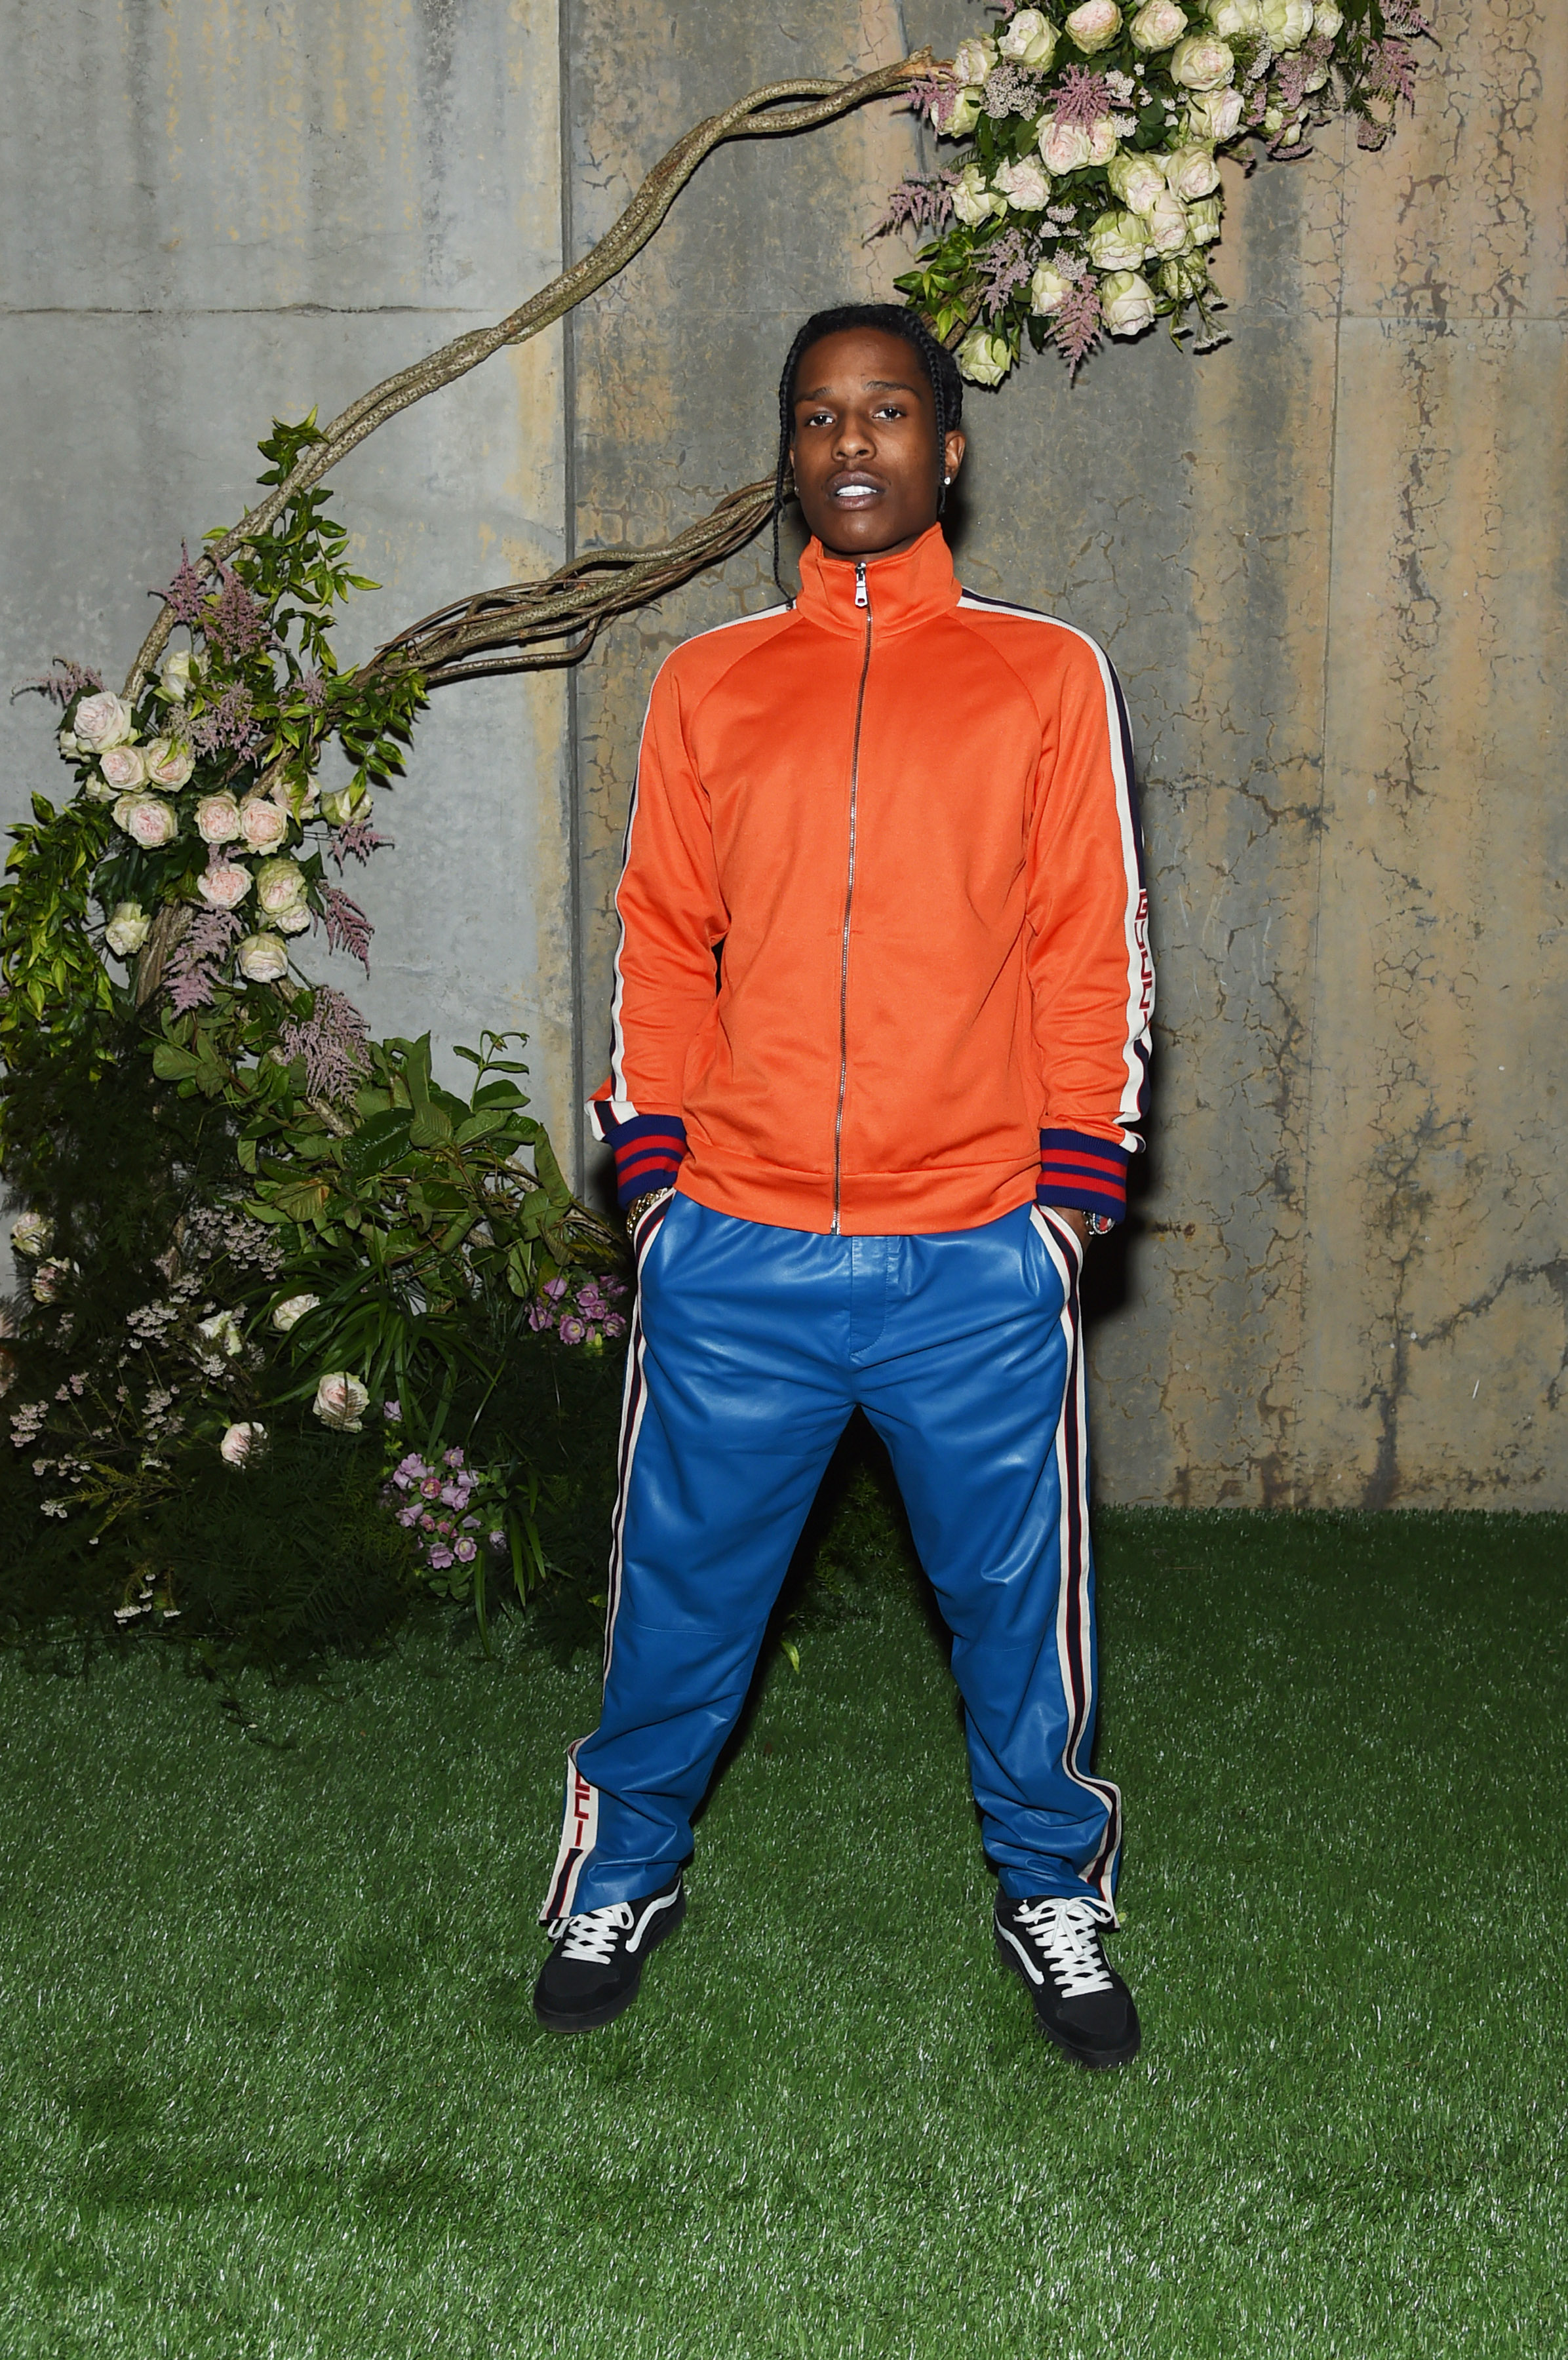 NEW YORK, NY - MAY 02: A$AP Rocky attends the Gucci Bloom Fragrance Launch at MoMA PS.1 on May 2, 2017 in New York City. (Photo by Jamie McCarthy/Getty Images for Gucci)